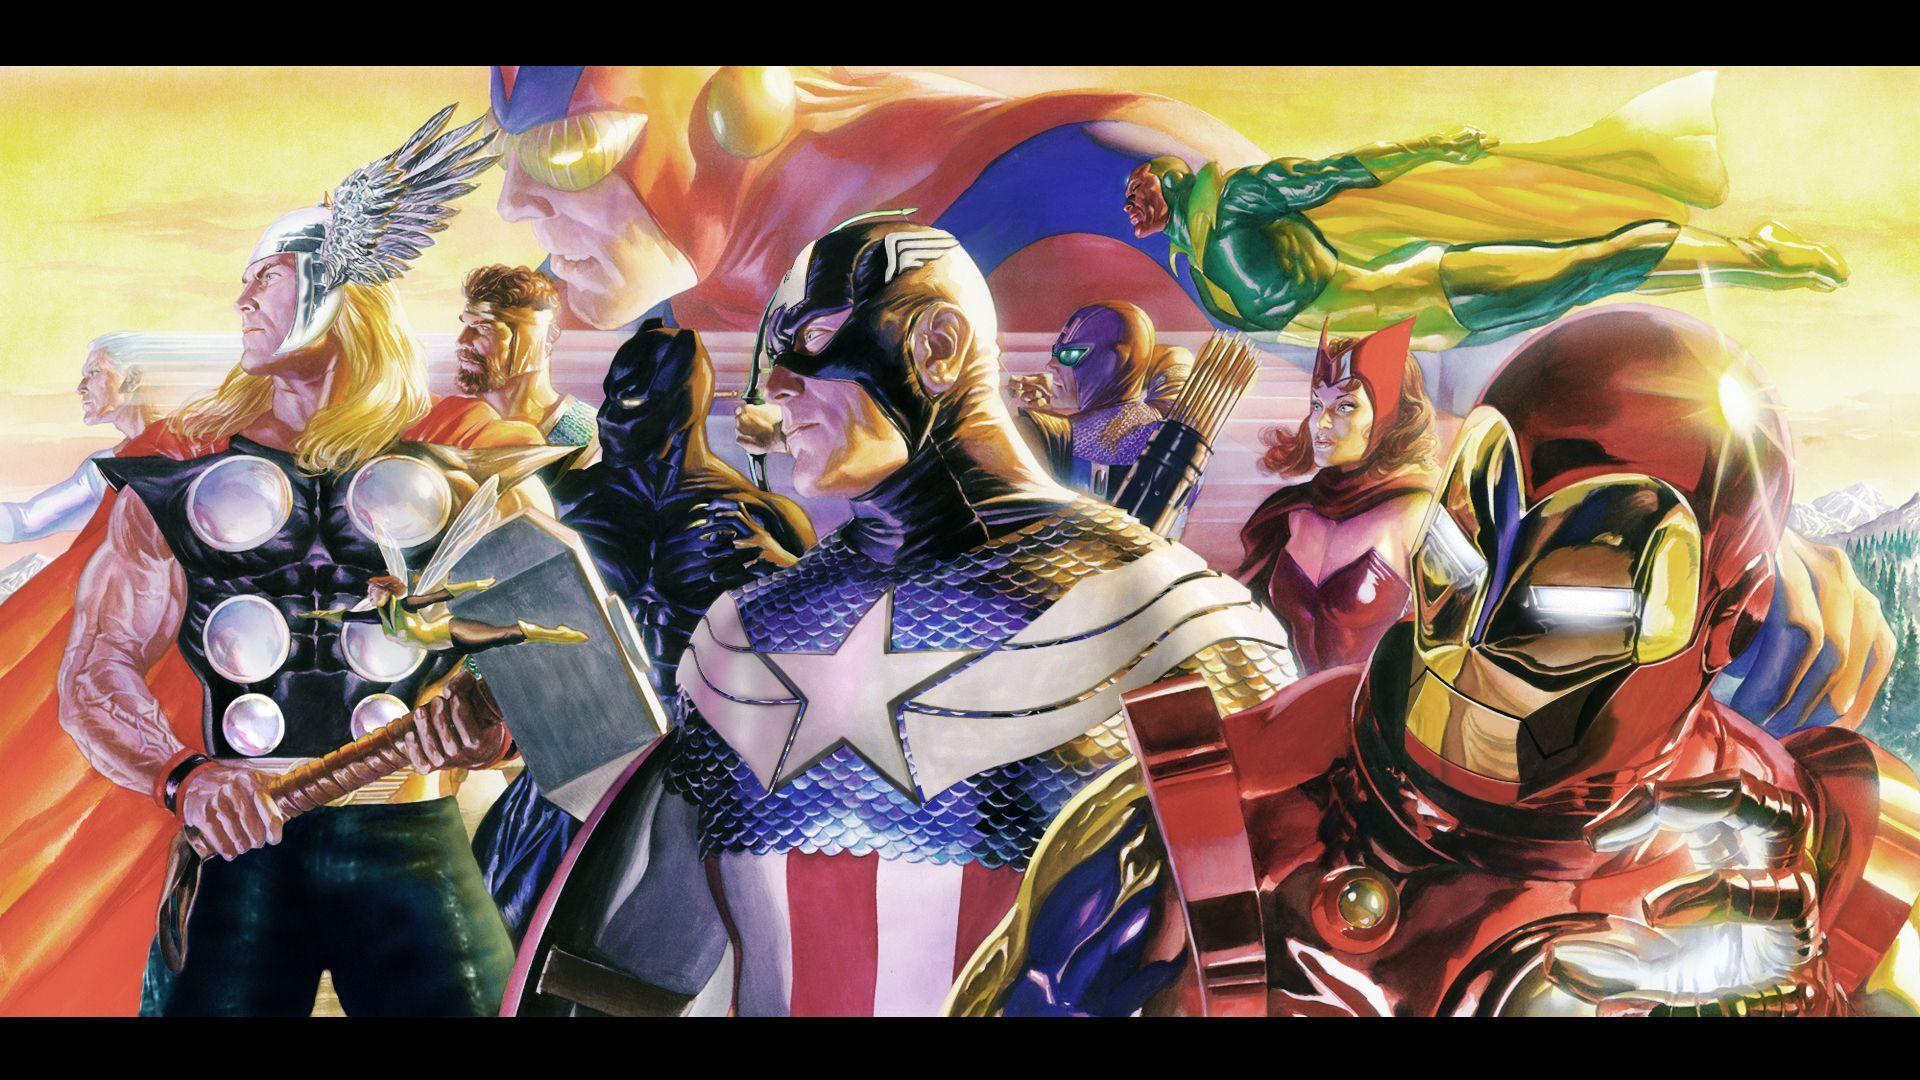 Alex Ross (in the Light of Justice)